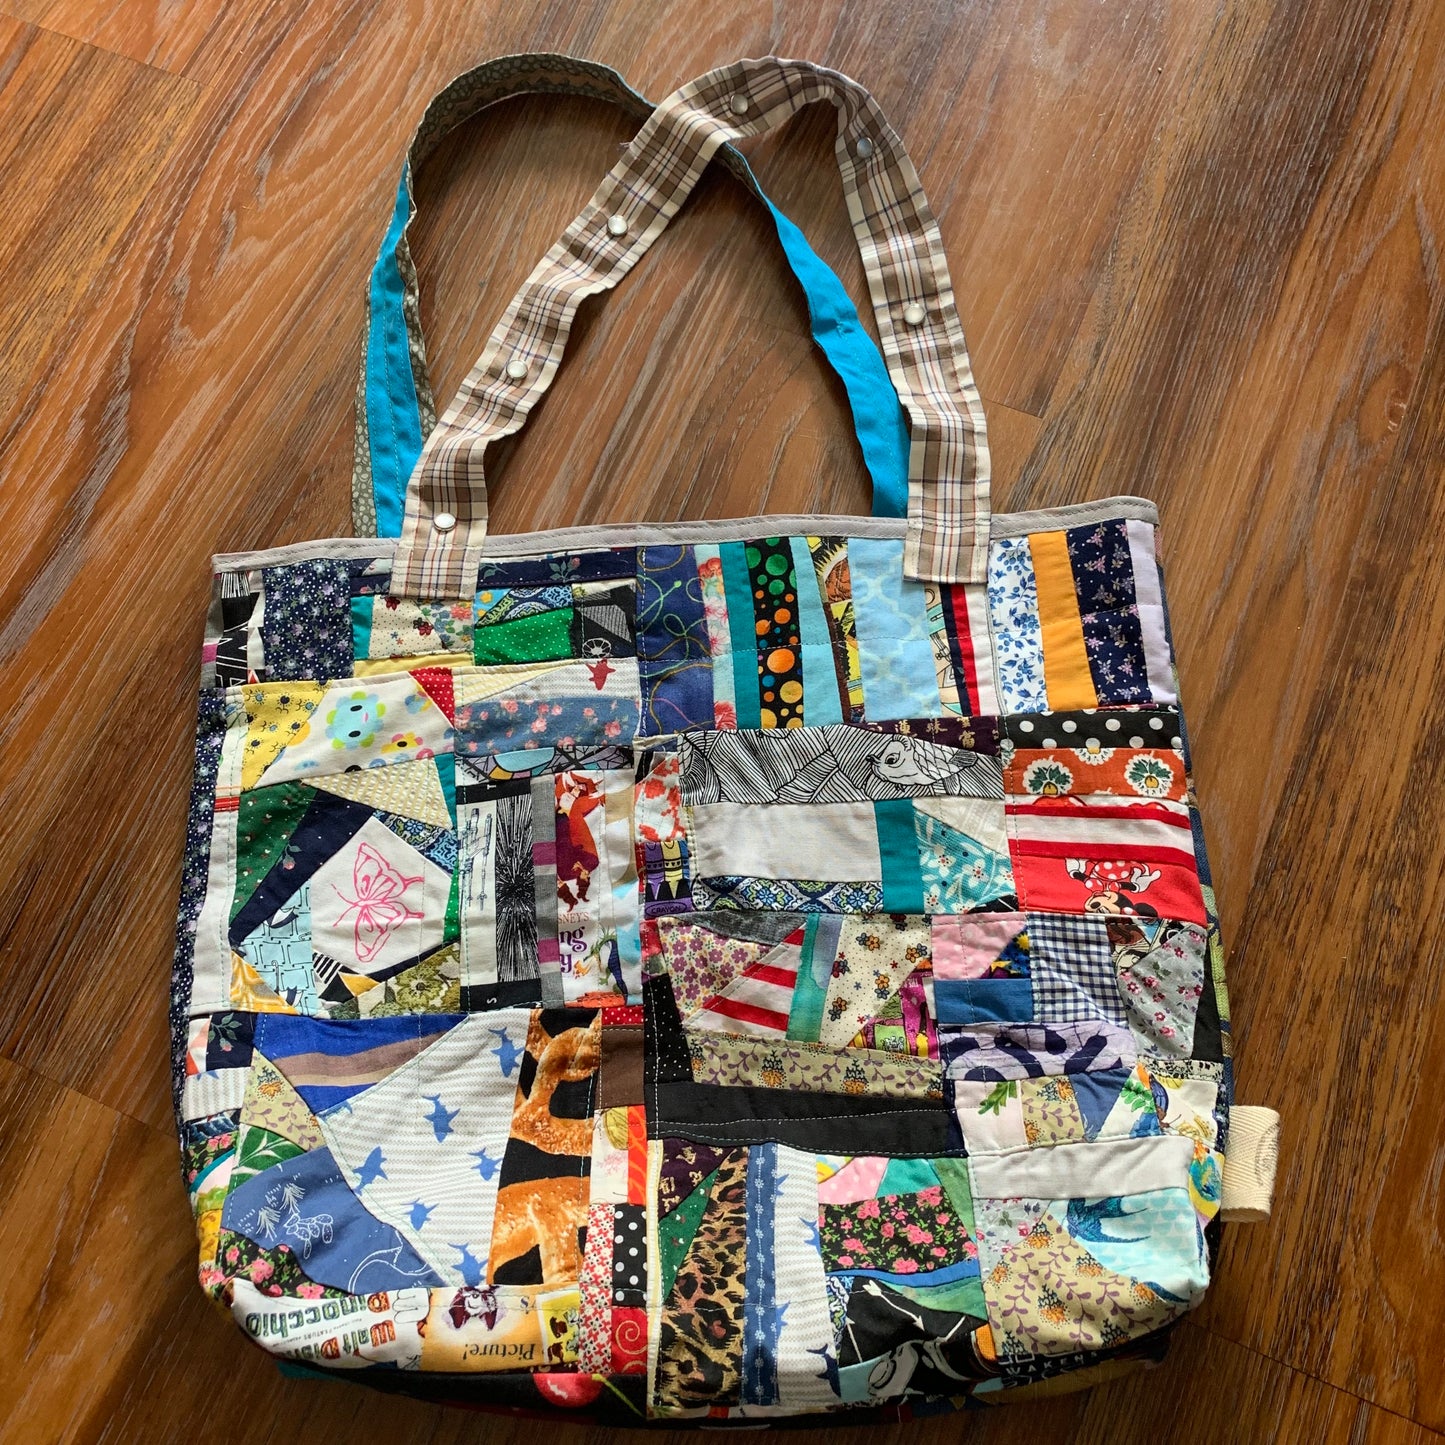 Large Perfectly Imperfect Tote Bag - Scrappy and Upcycled